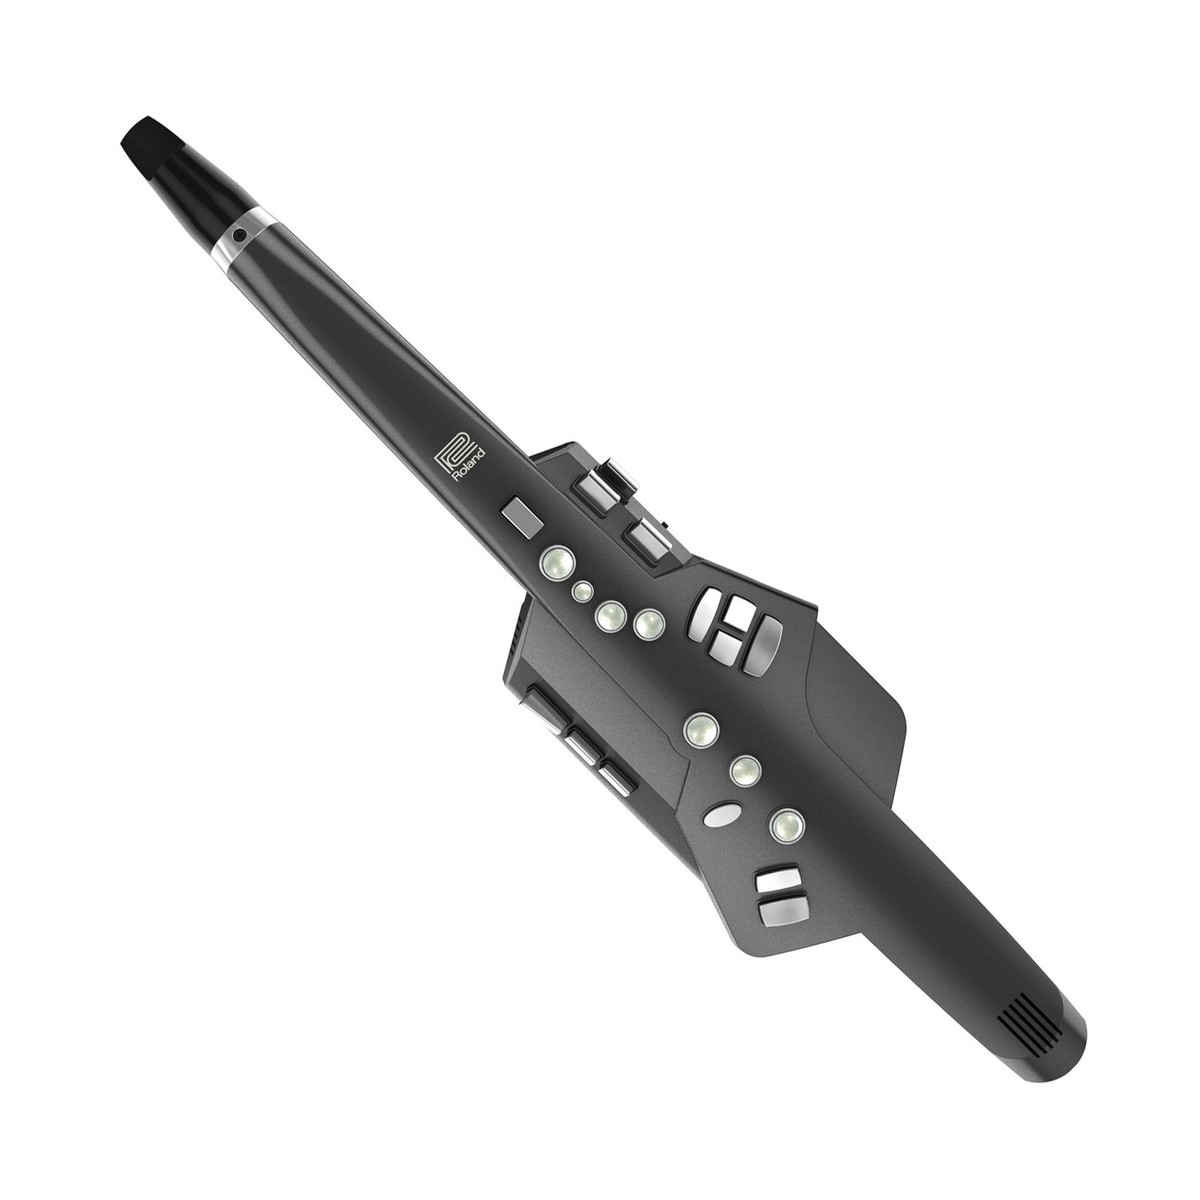 An image of B-Stock Roland AE-10G Aerophone Synthesizer - Graphite Black Edition | PMT Onlin...